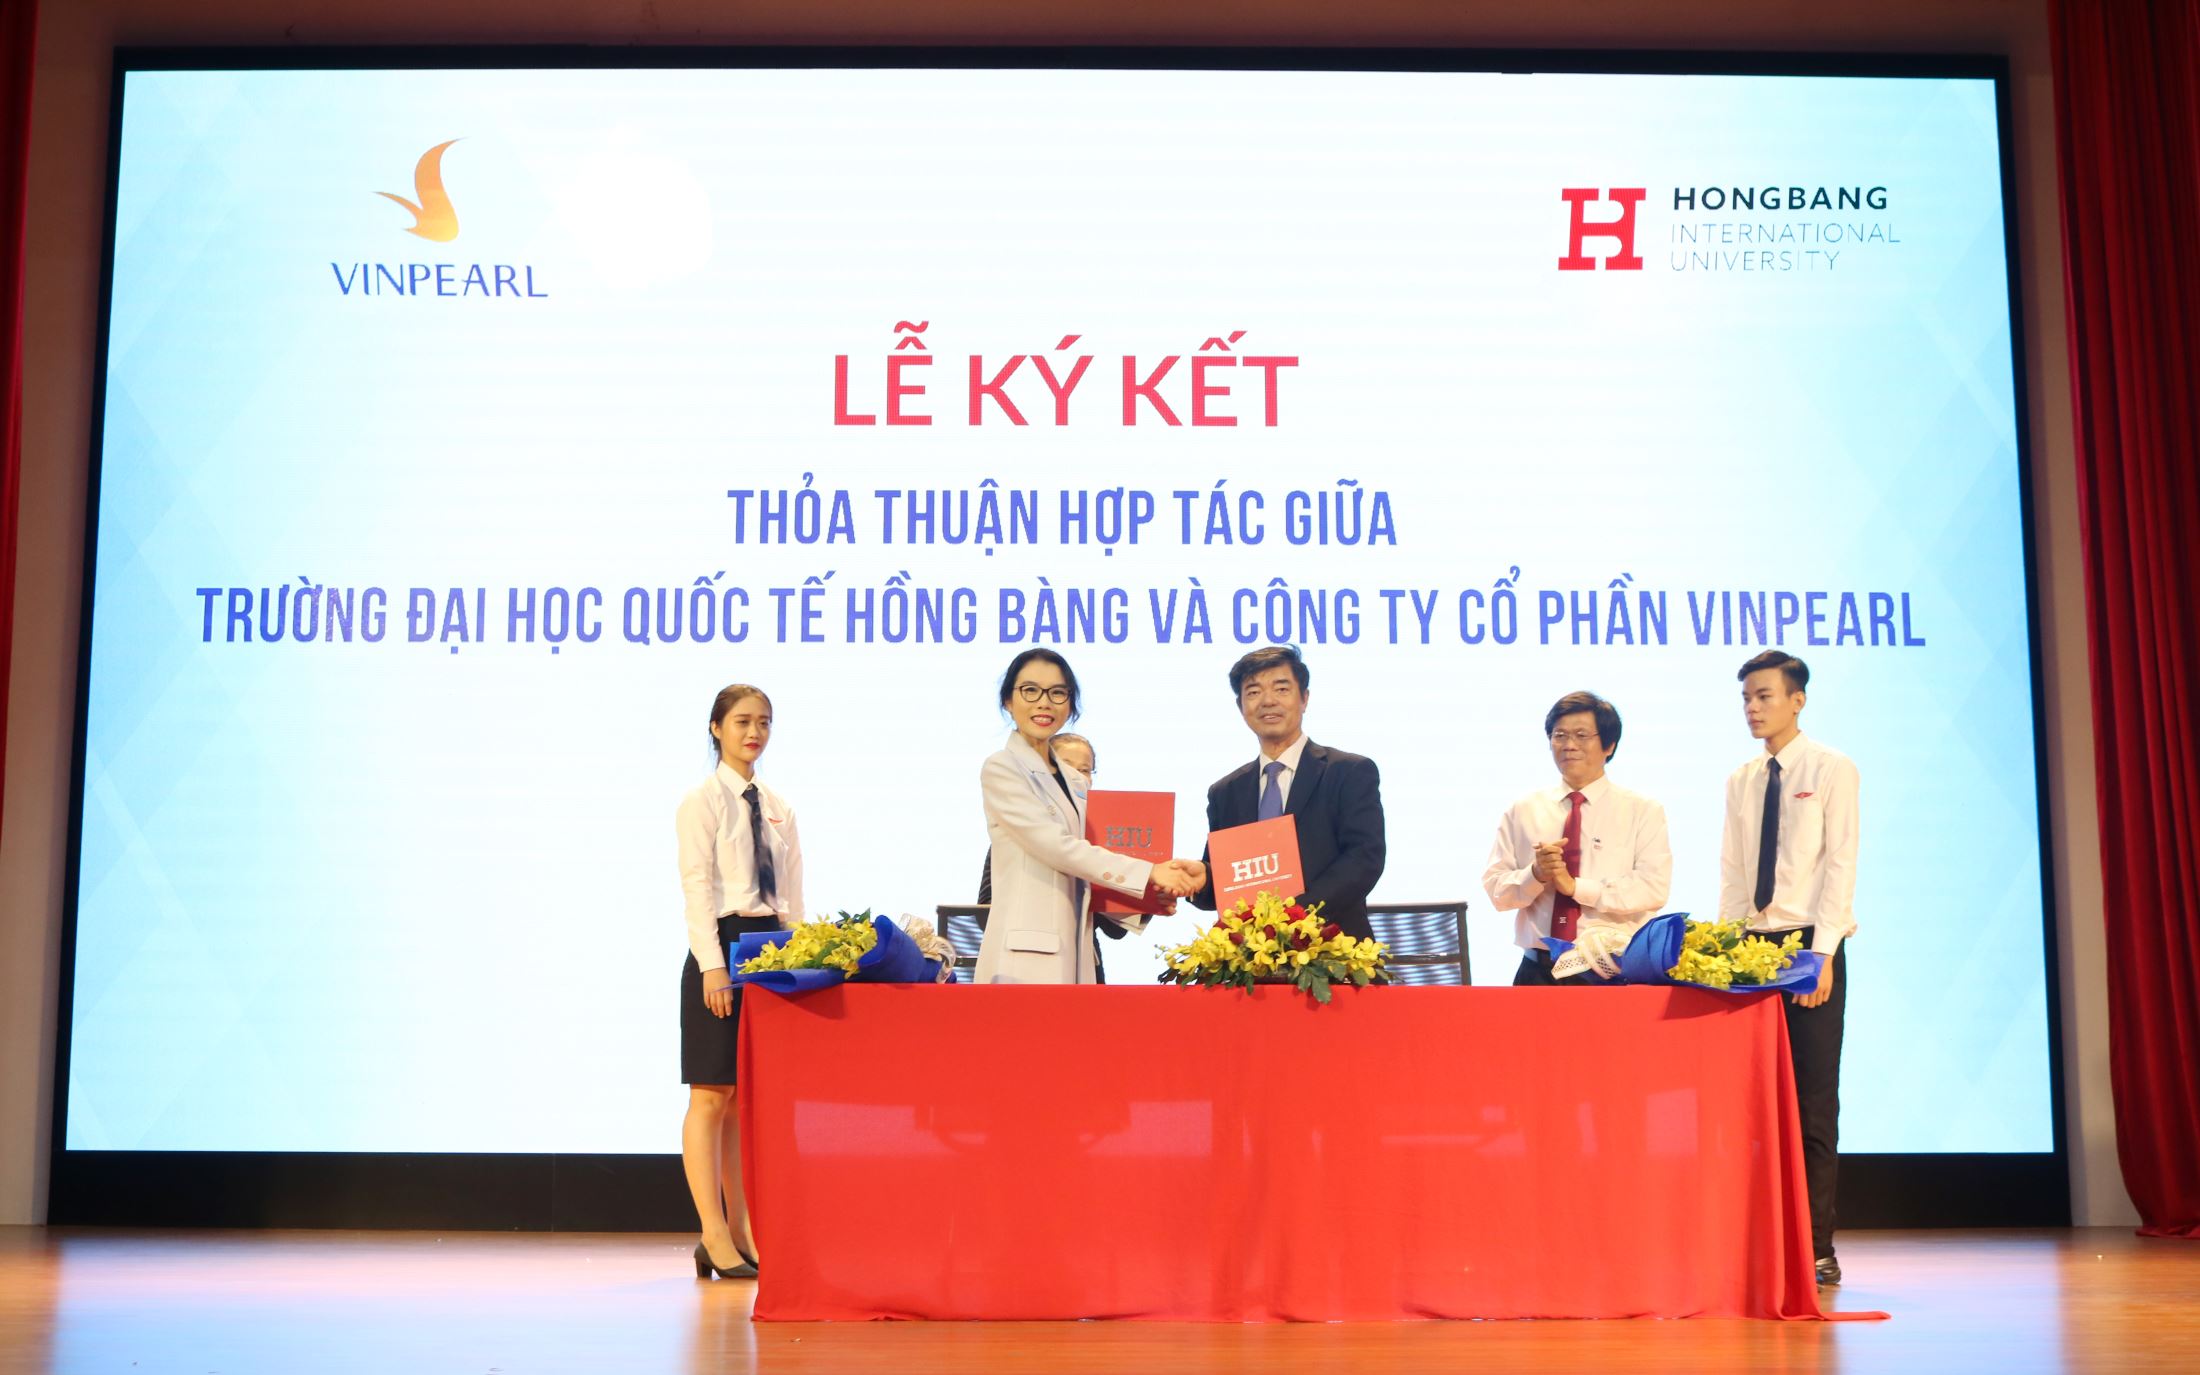 The cooperation agreement signed by Hong Bang International University with Vinpearl (Vingroup) allows HIU students to practice and work at Vinpearl